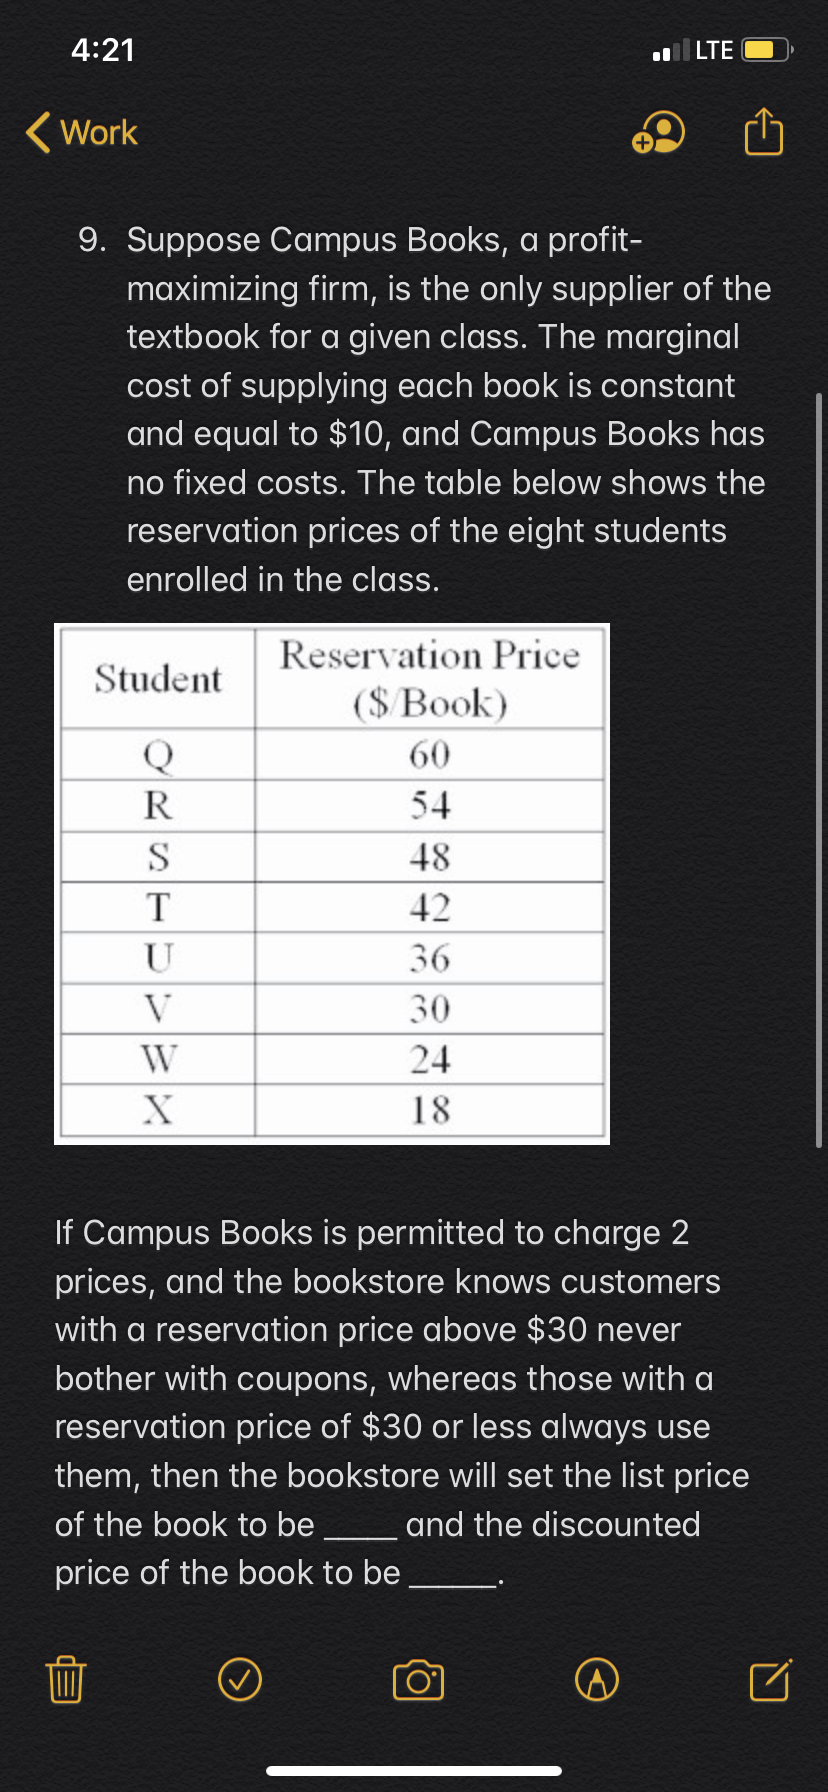 4:21
lLTE
Work
9. Suppose Campus Books, a profit-
maximizing firm, is the only supplier of the
textbook for a given class. The marginal
cost of supplying each book is constant
and equal to $10, and Campus Books has
no fixed costs. The table below shows the
reservation prices of the eight students
enrolled in the class.
Reservation Price
Student
(SBook)
60
54
48
42
U
36
V
30
24
18
If Campus Books is permitted to charge 2
prices, and the bookstore knows customers
with a reservation price above $30 never
bother with coupons, whereas those with a
reservation price of $30 or less always use
them, then the bookstore will set the list price
of the book to be
and the discounted
price of the book to be
RST
